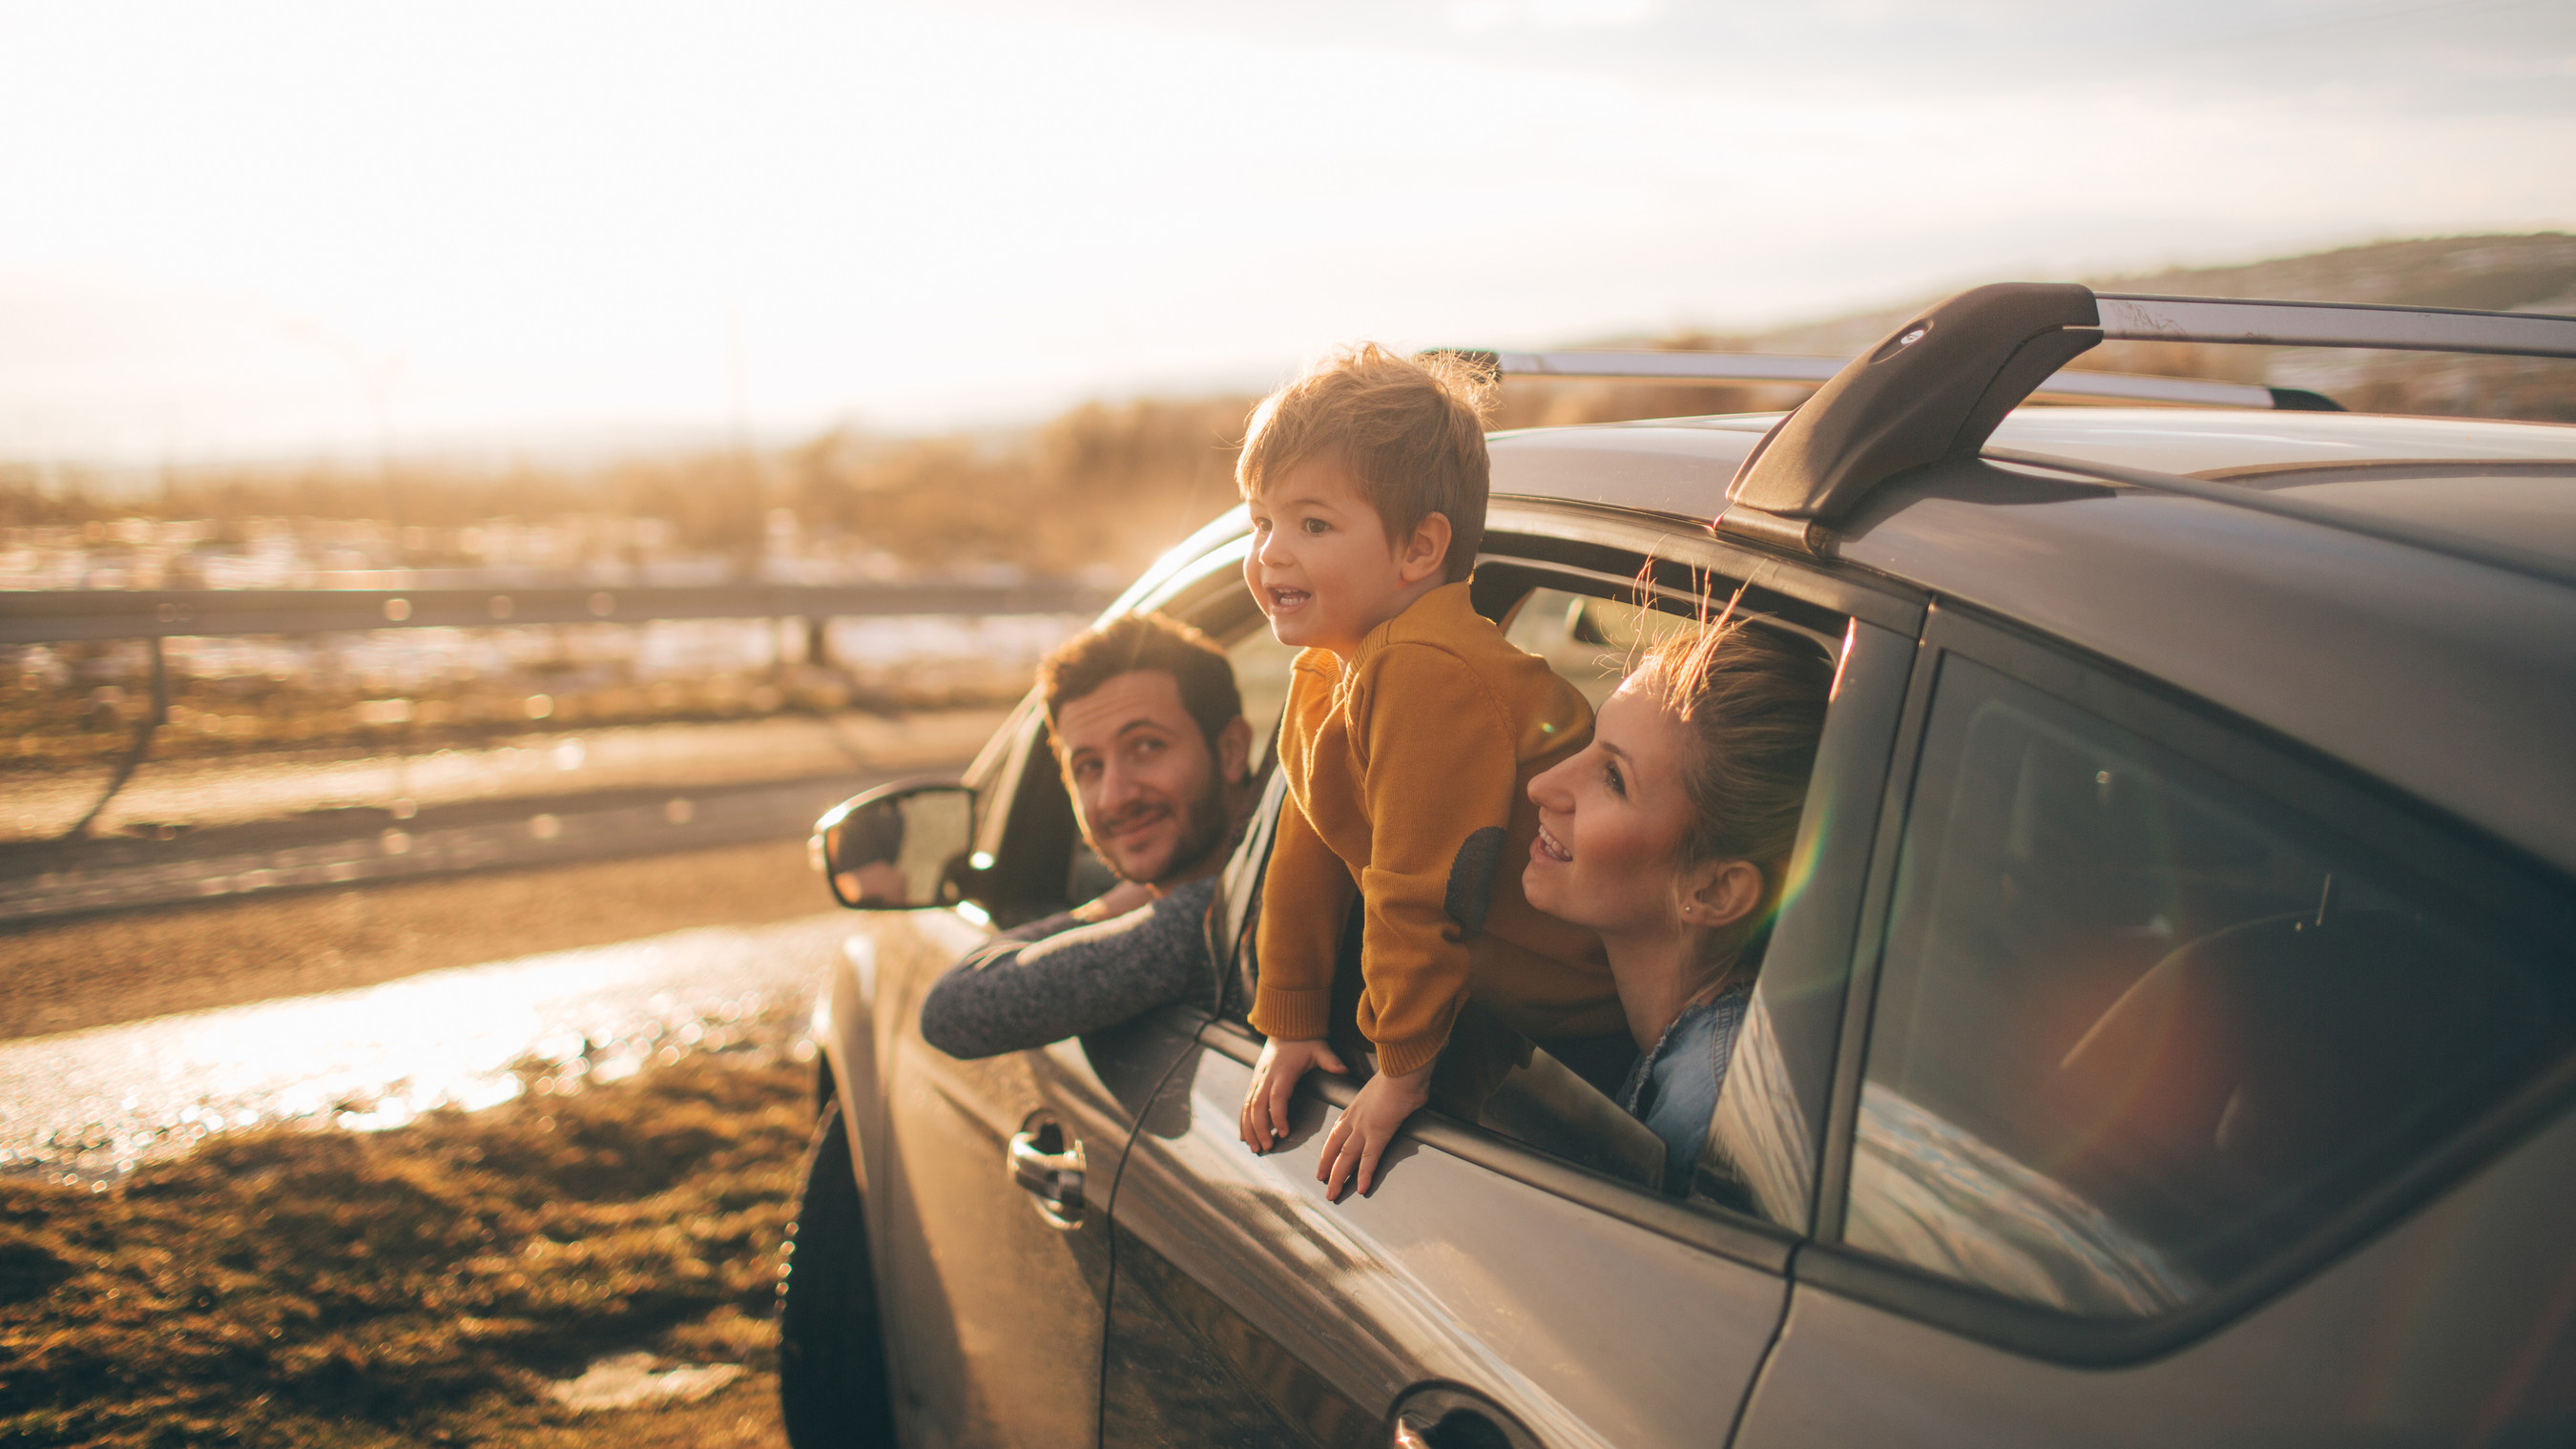 How To Select The Best Car Insurance Plans For A Family Car